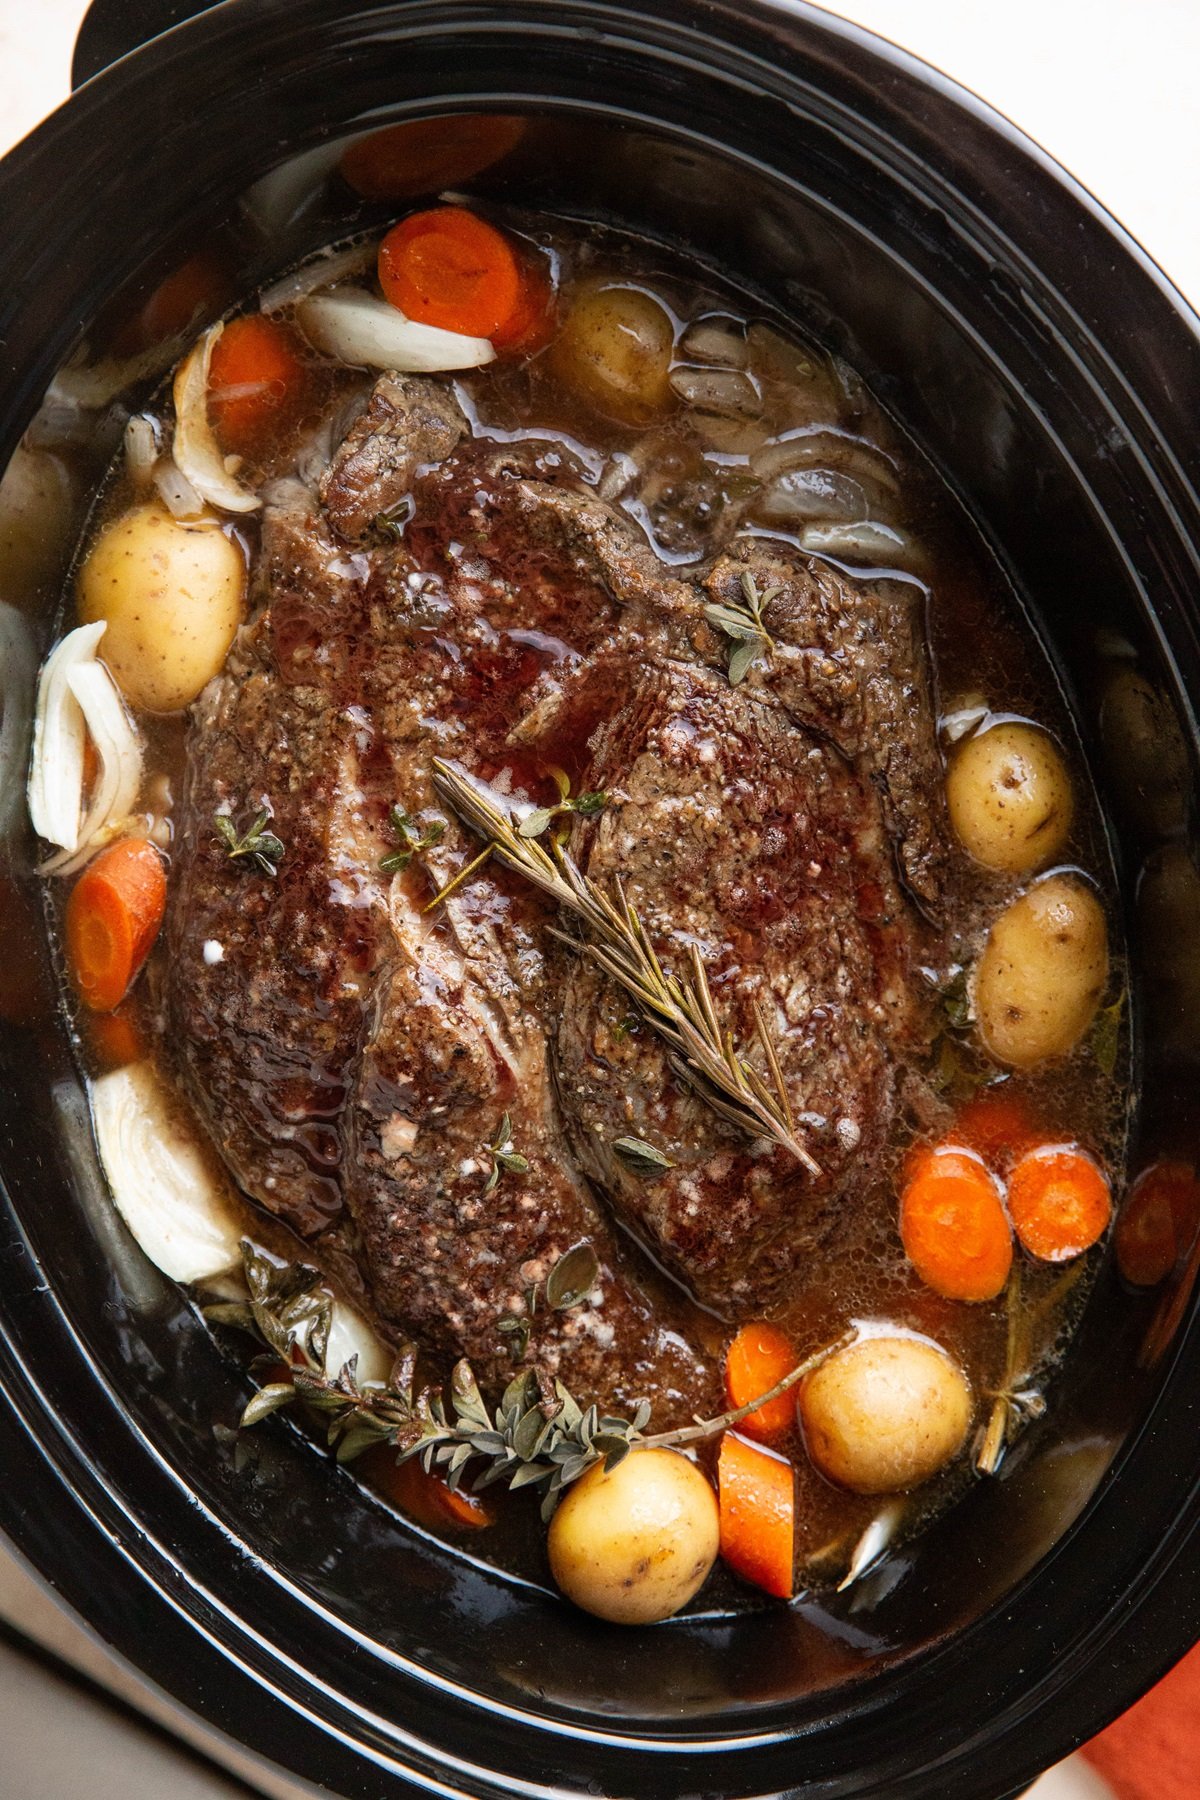 Slow cooker with beef roast and vegetables, ready to serve.